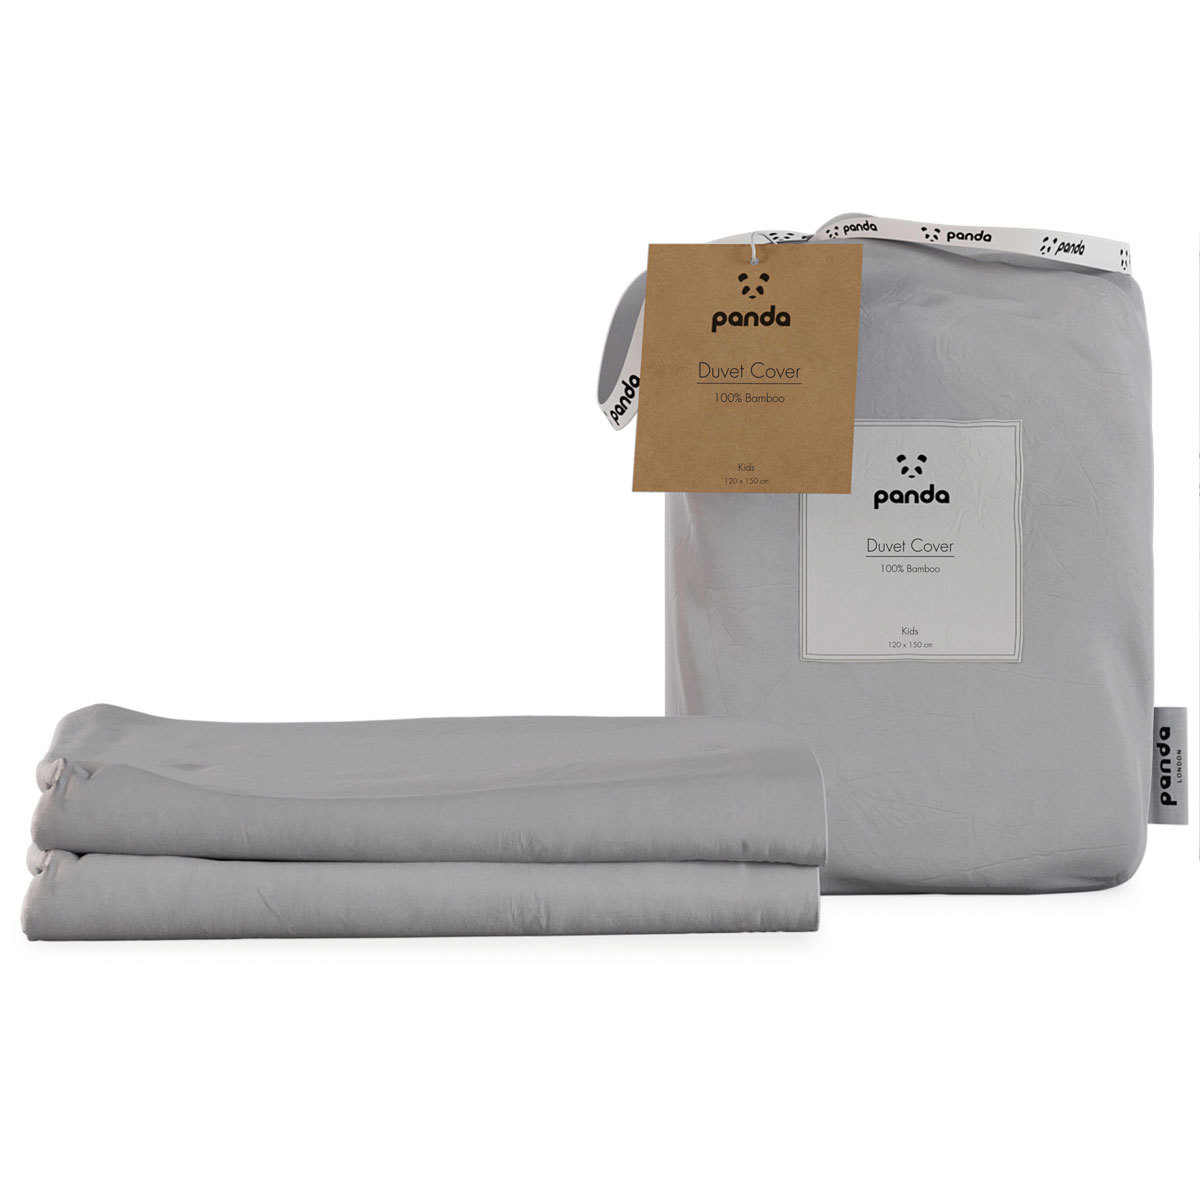 Folded Image of Panda Fitted sheet with packaging